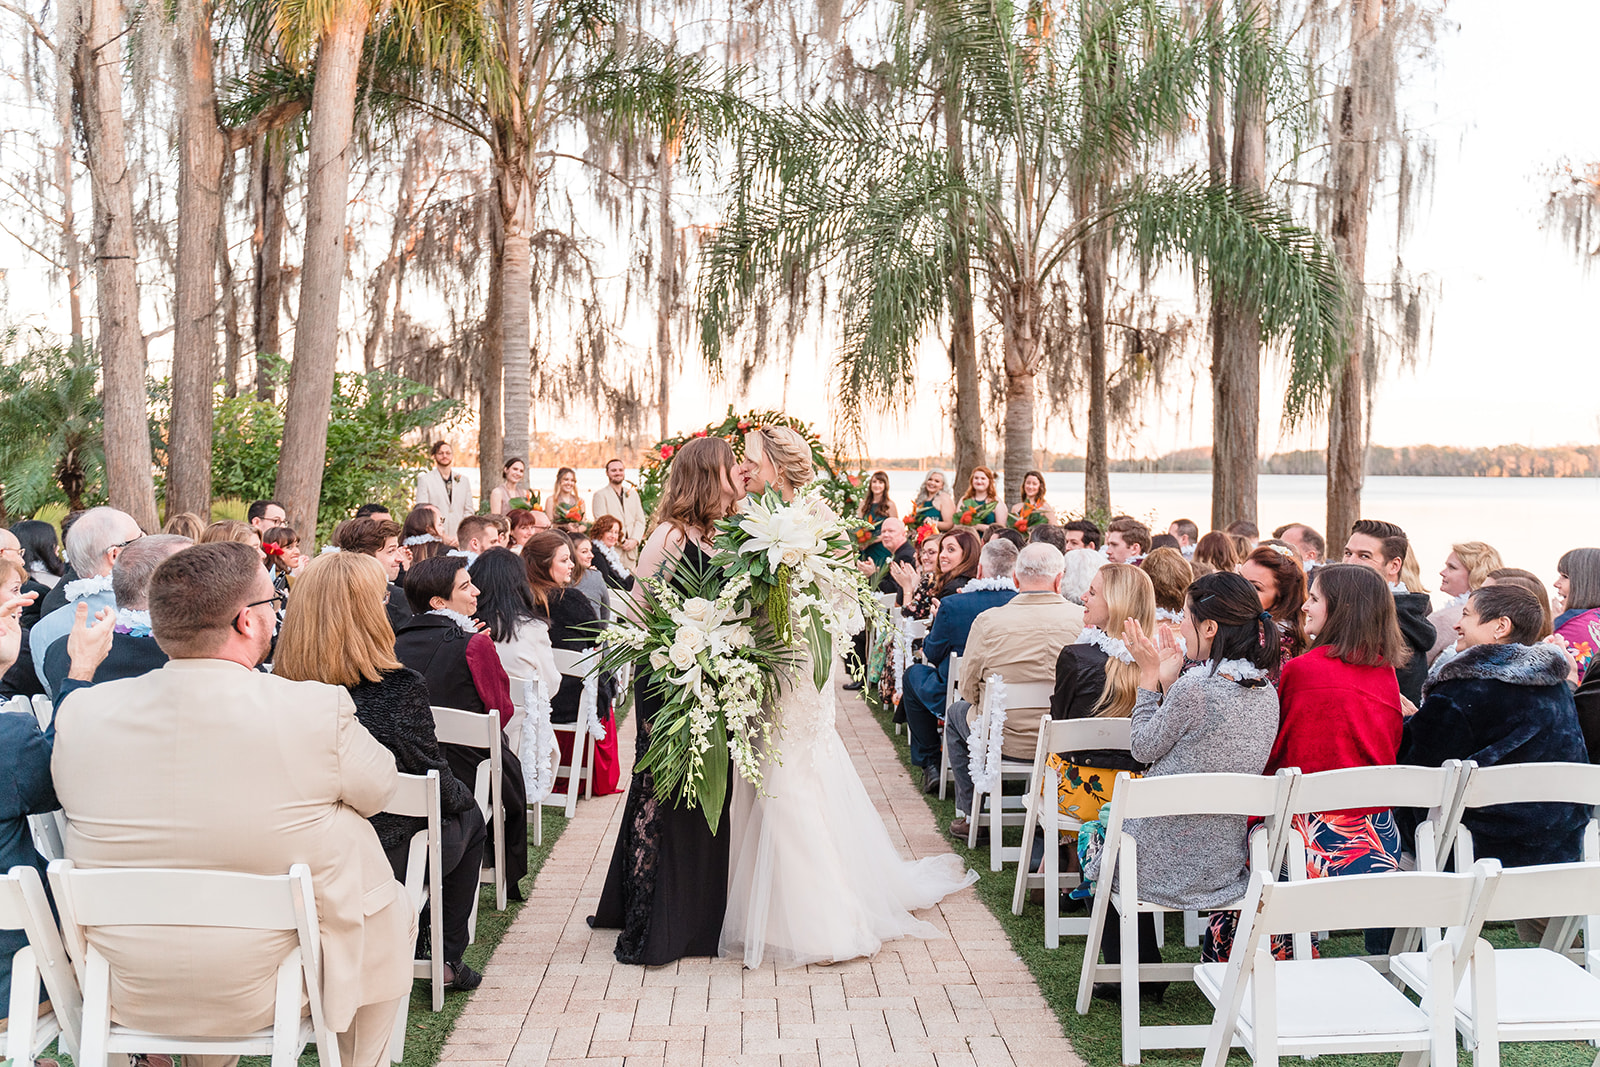 Two brides share a kiss as they walk down the aisle together, surrounded by smiling and applauding guests, with a backdrop of lush palm trees and a serene Florida lake.